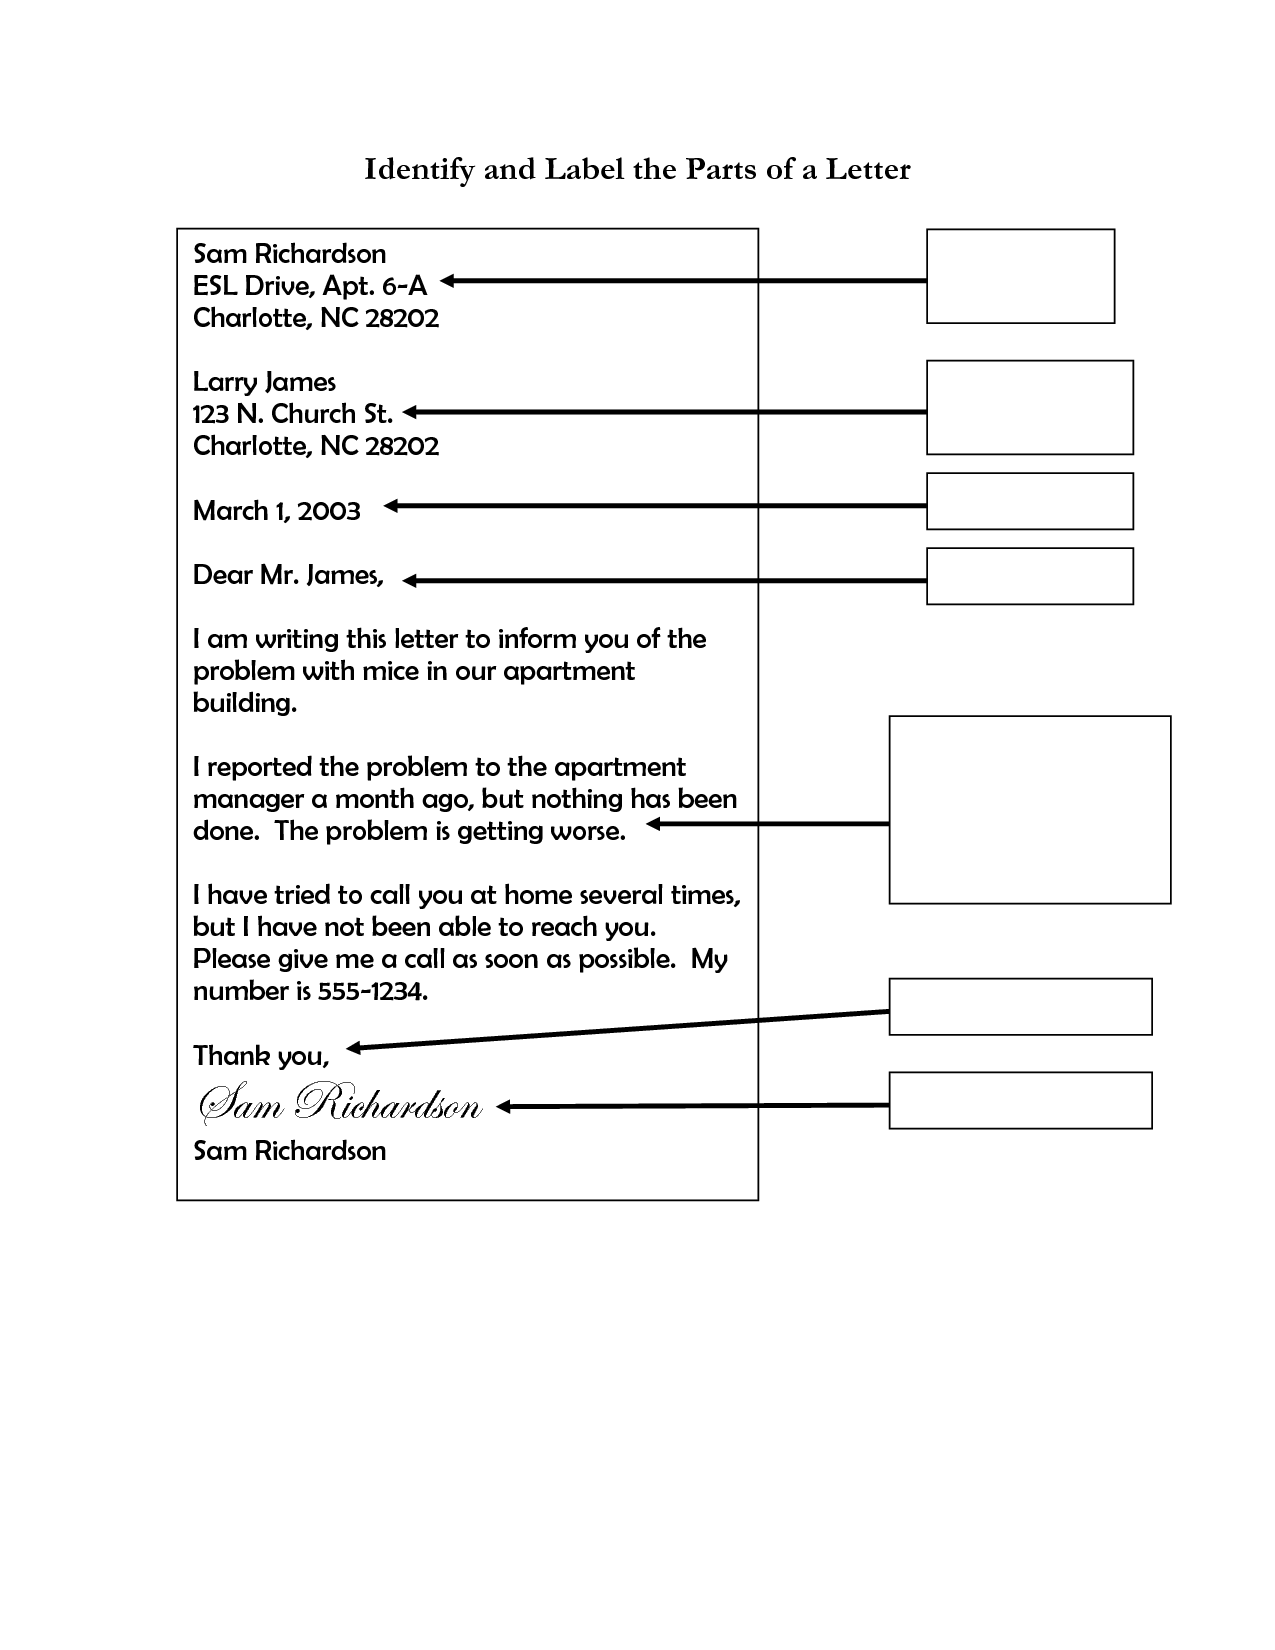 Worksheet Parts Of A Letter For Kids English Teaching Worksheets Parts Of A Letter Games 